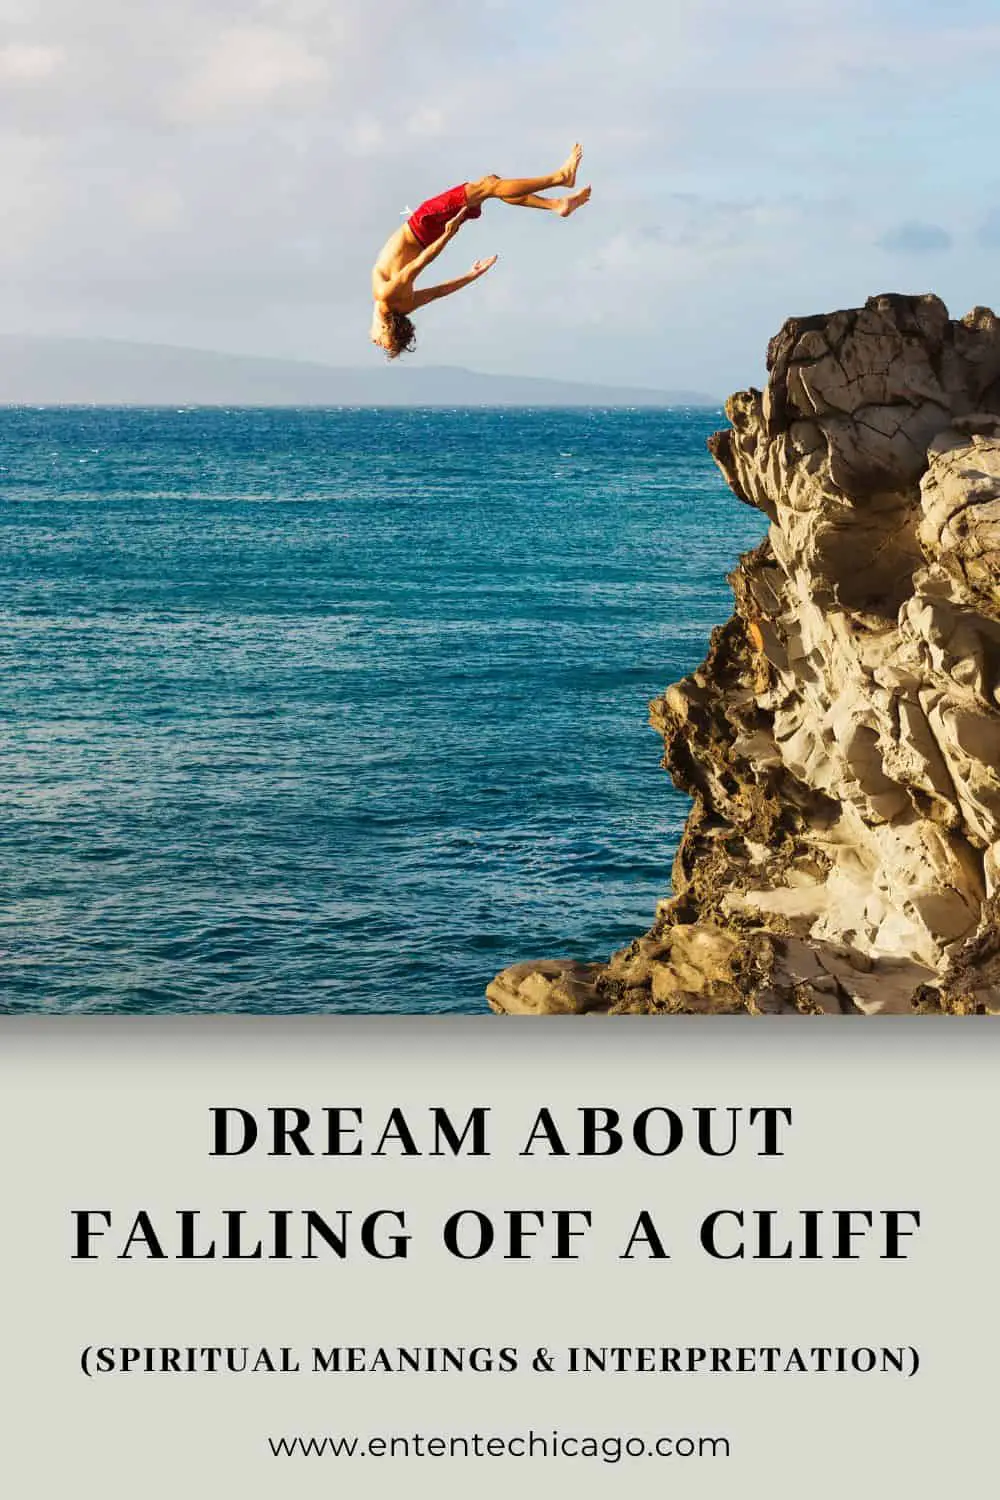 What Do Dreams Of Driving Off A Cliff Symbolize?